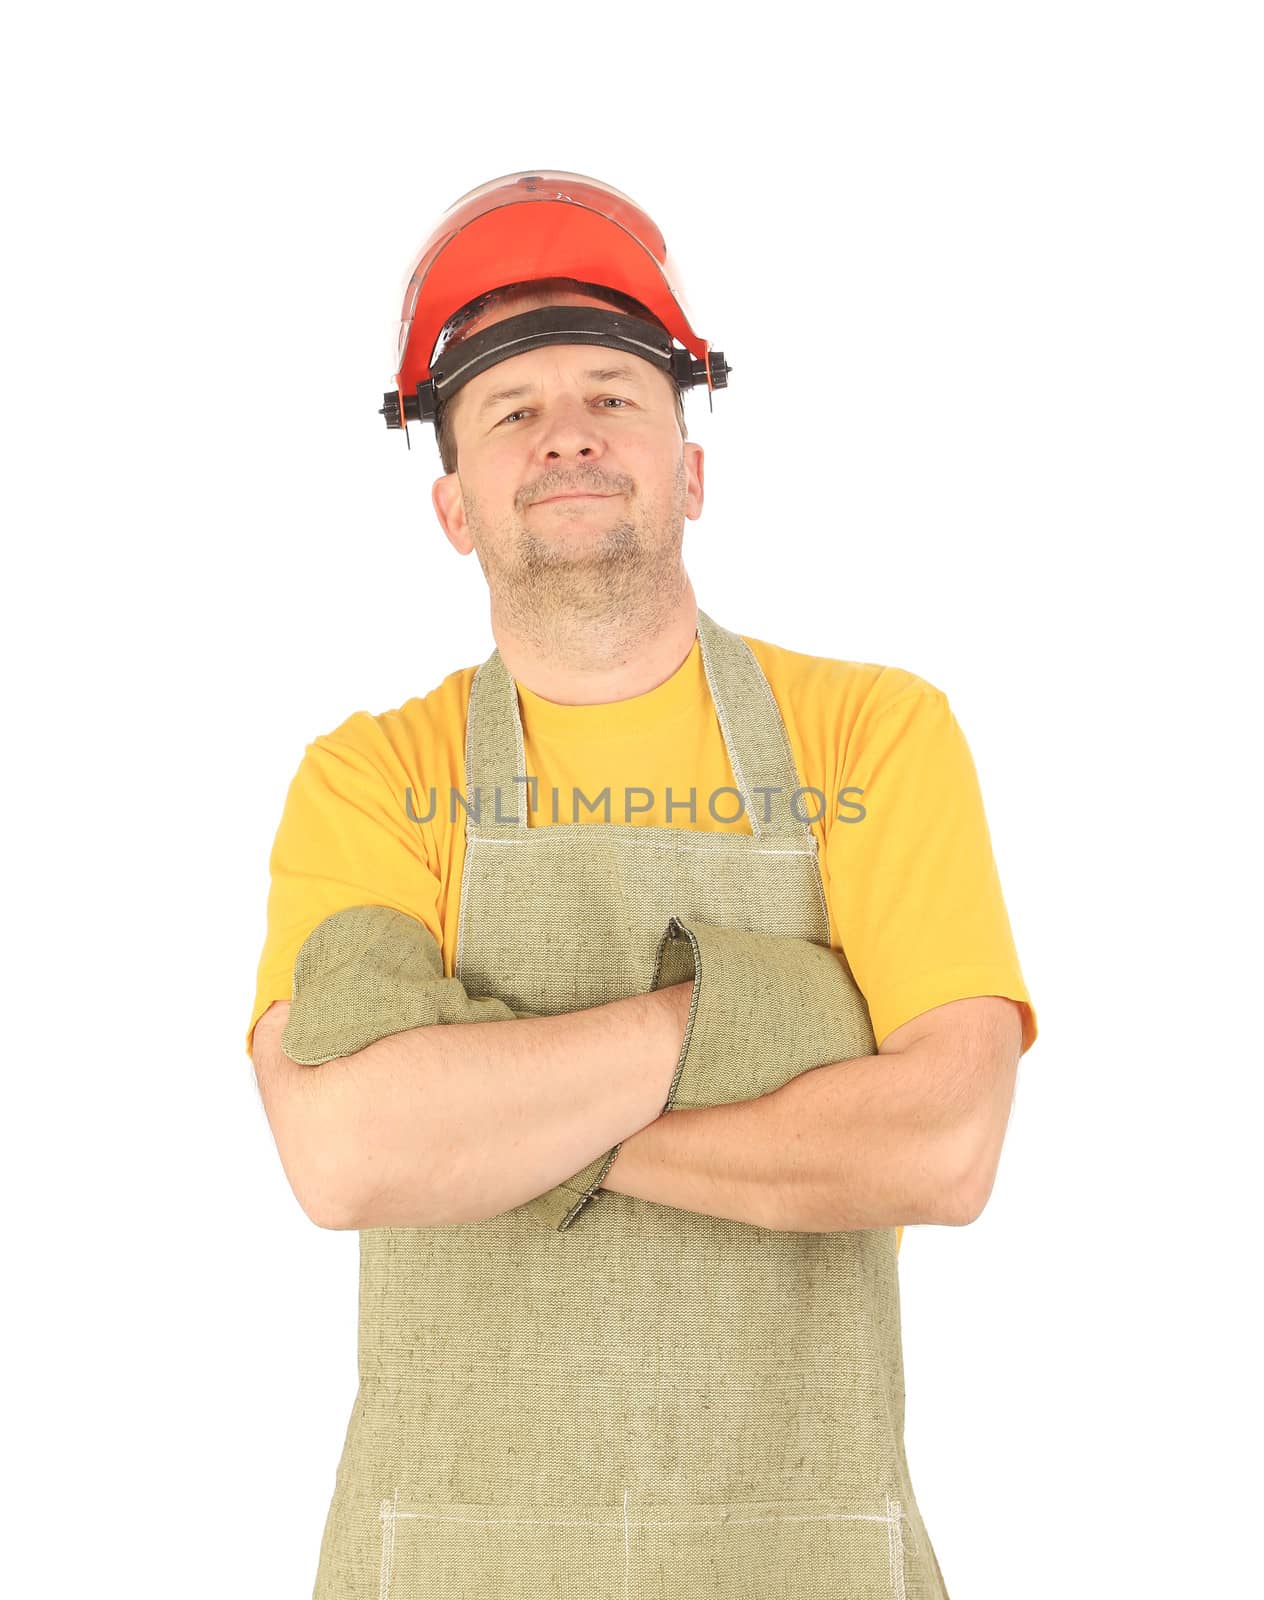 Man in red hard cap and apron. Isolated on a white background.